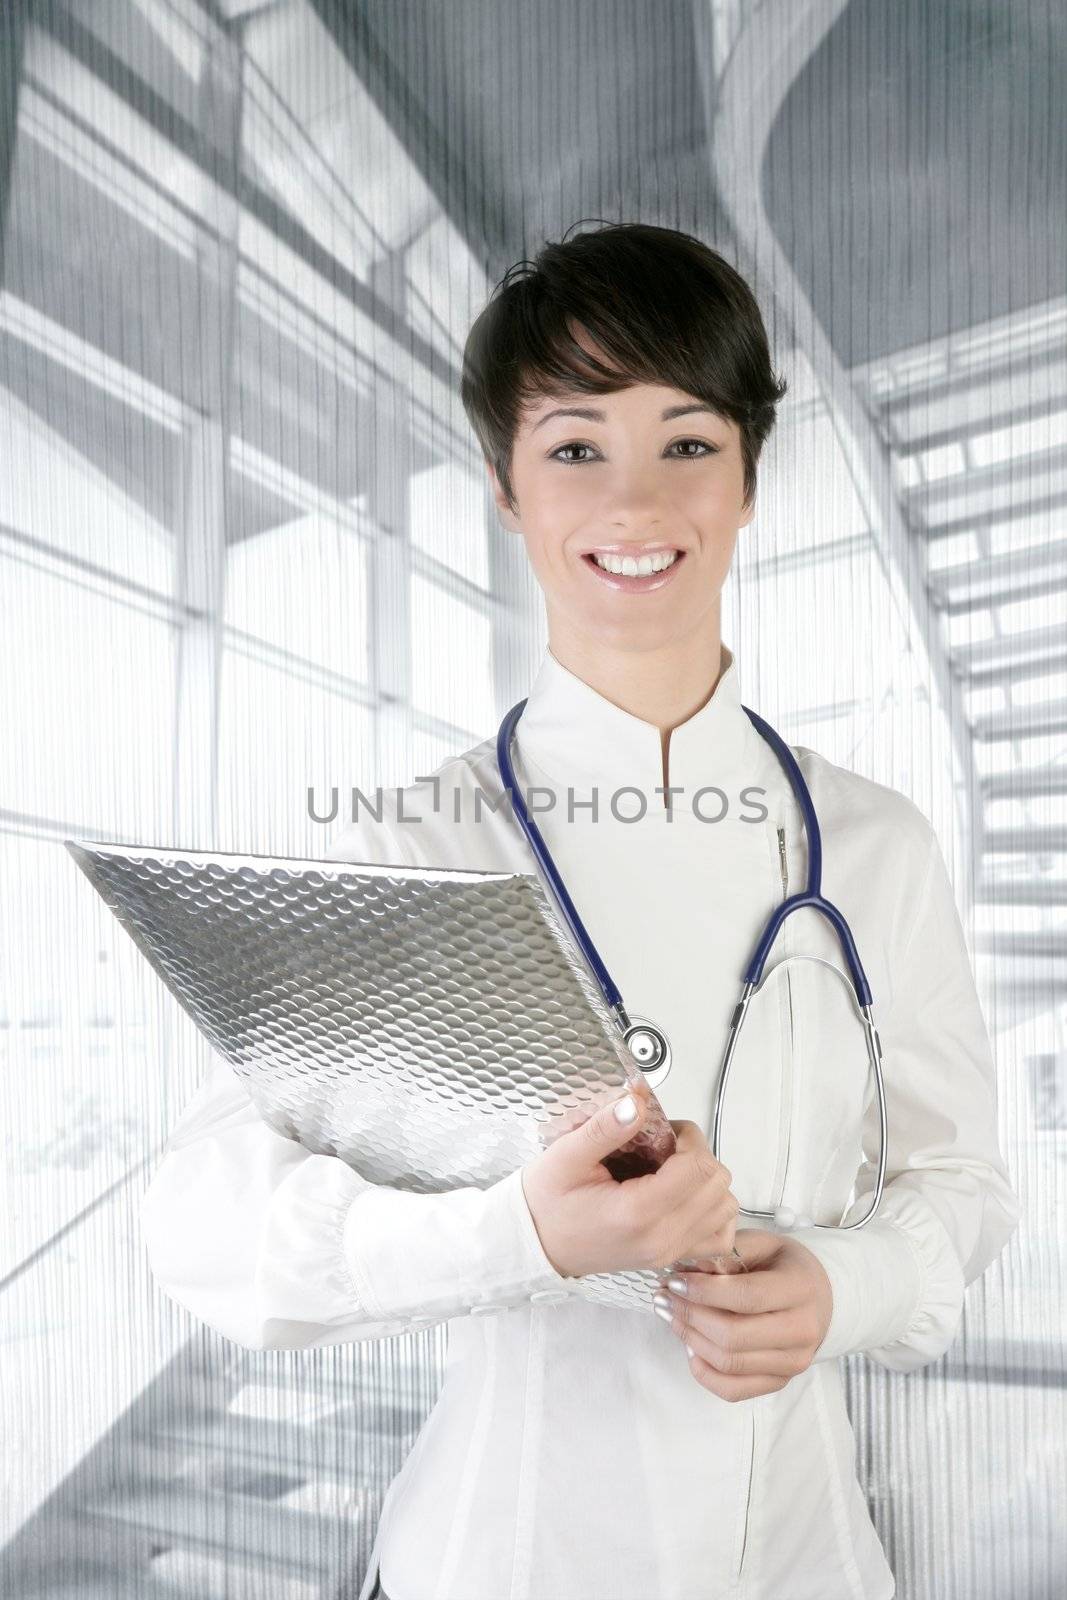 modern future doctor woman stethoscope and silver folder